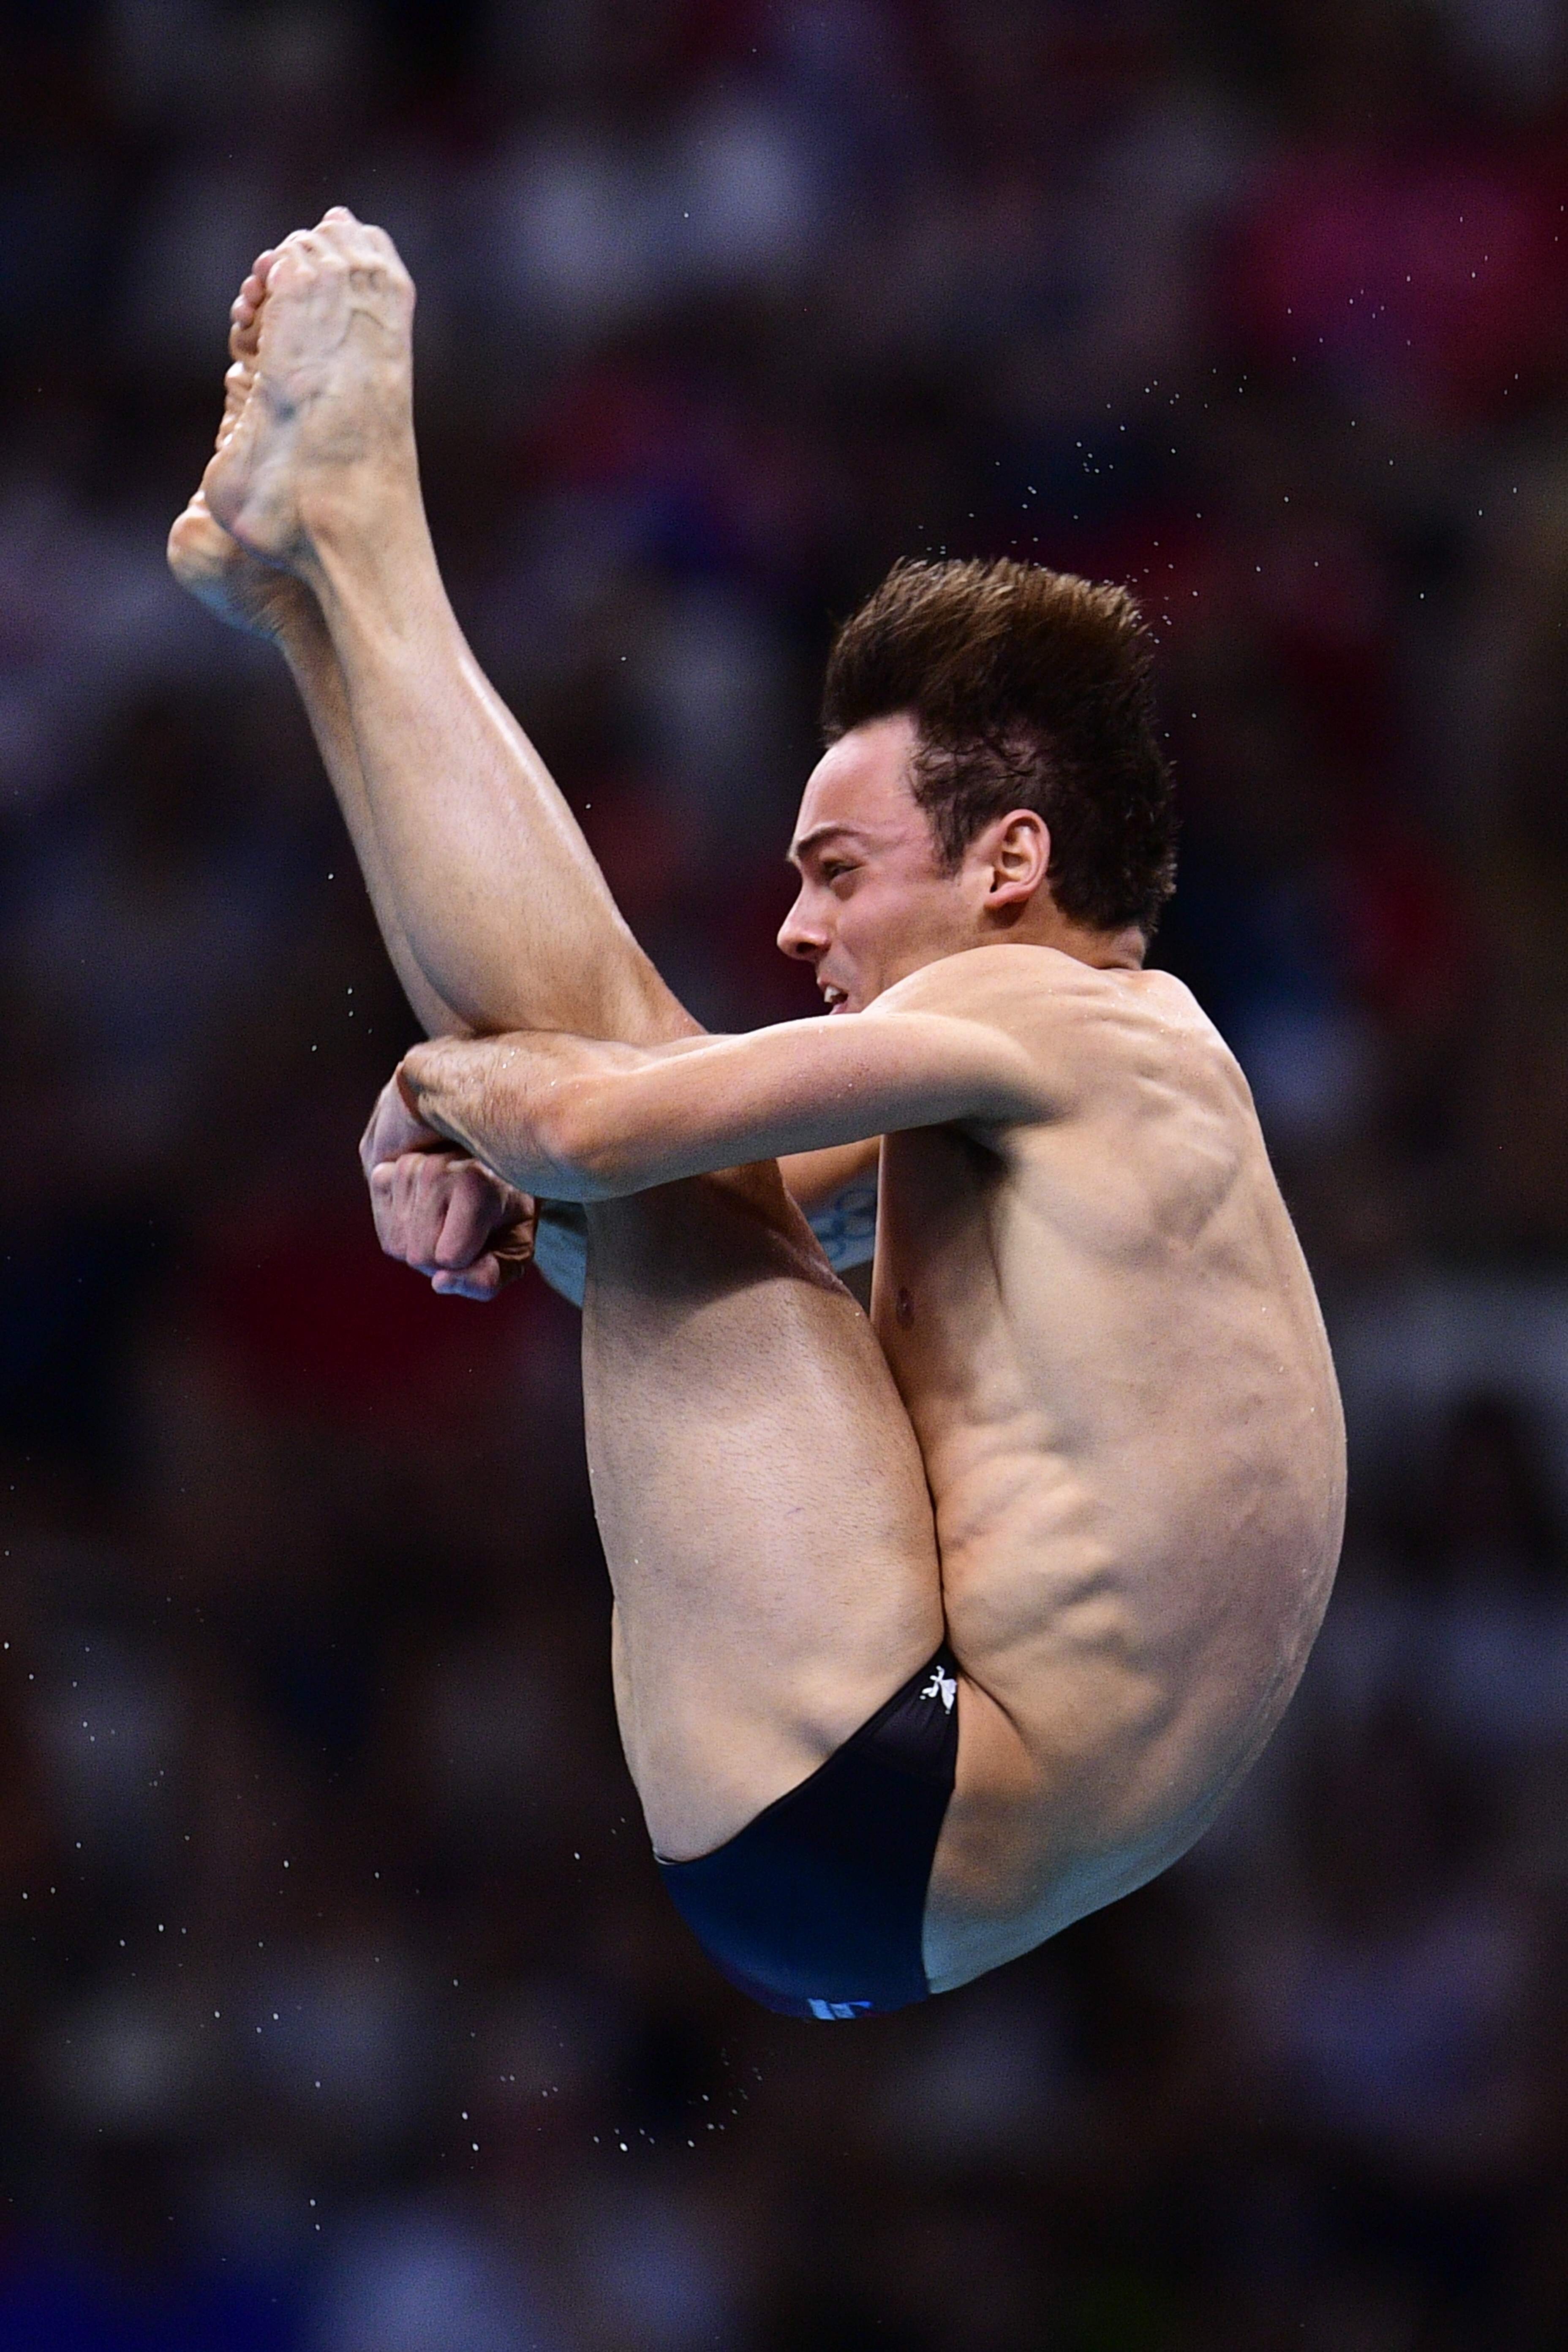 Soon to be four-time Olympian Tom Daley will get another chance to add to his illustrious career at the 2020 Summer Olympics in Tokyo. Photo: AFP